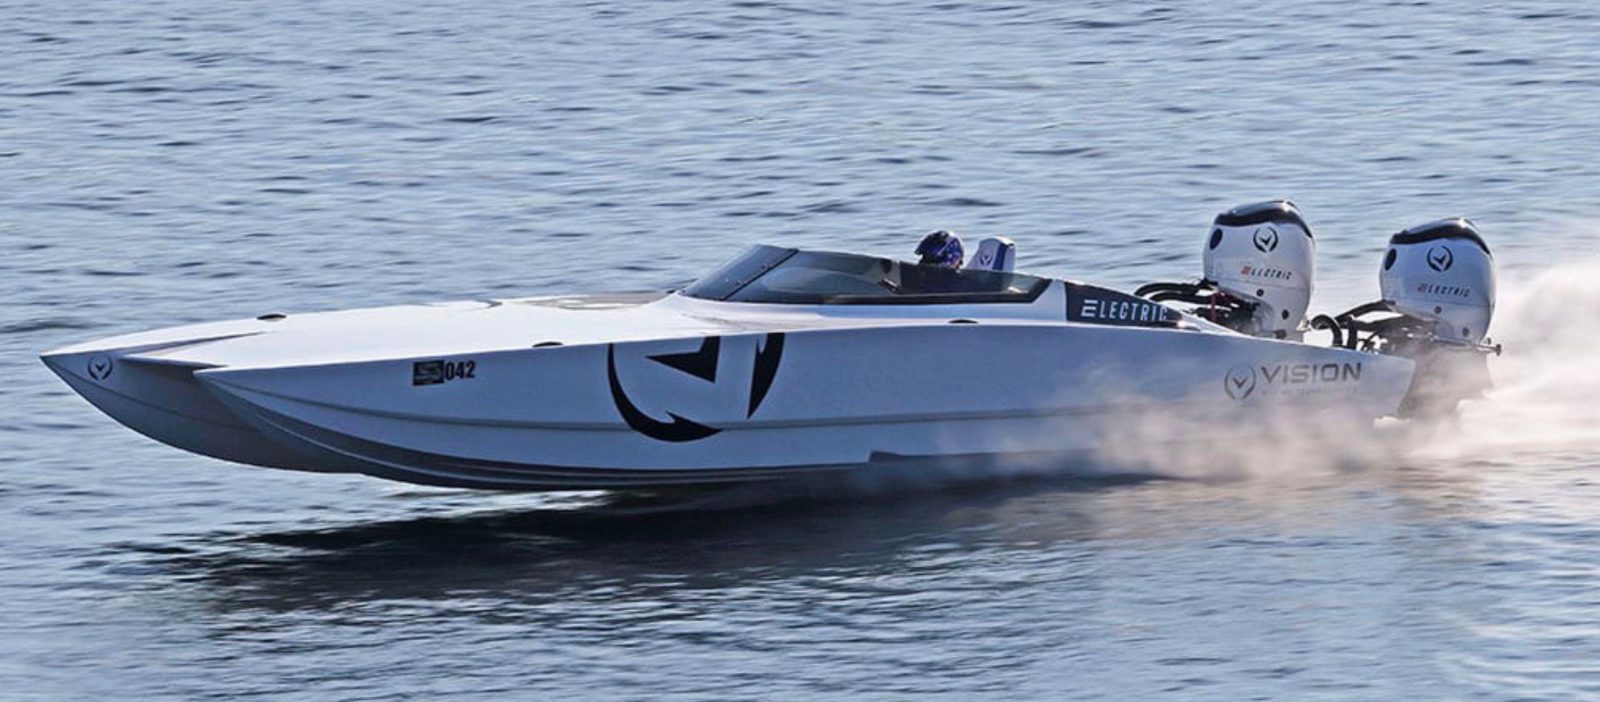 Vision Marine electric boat speed record